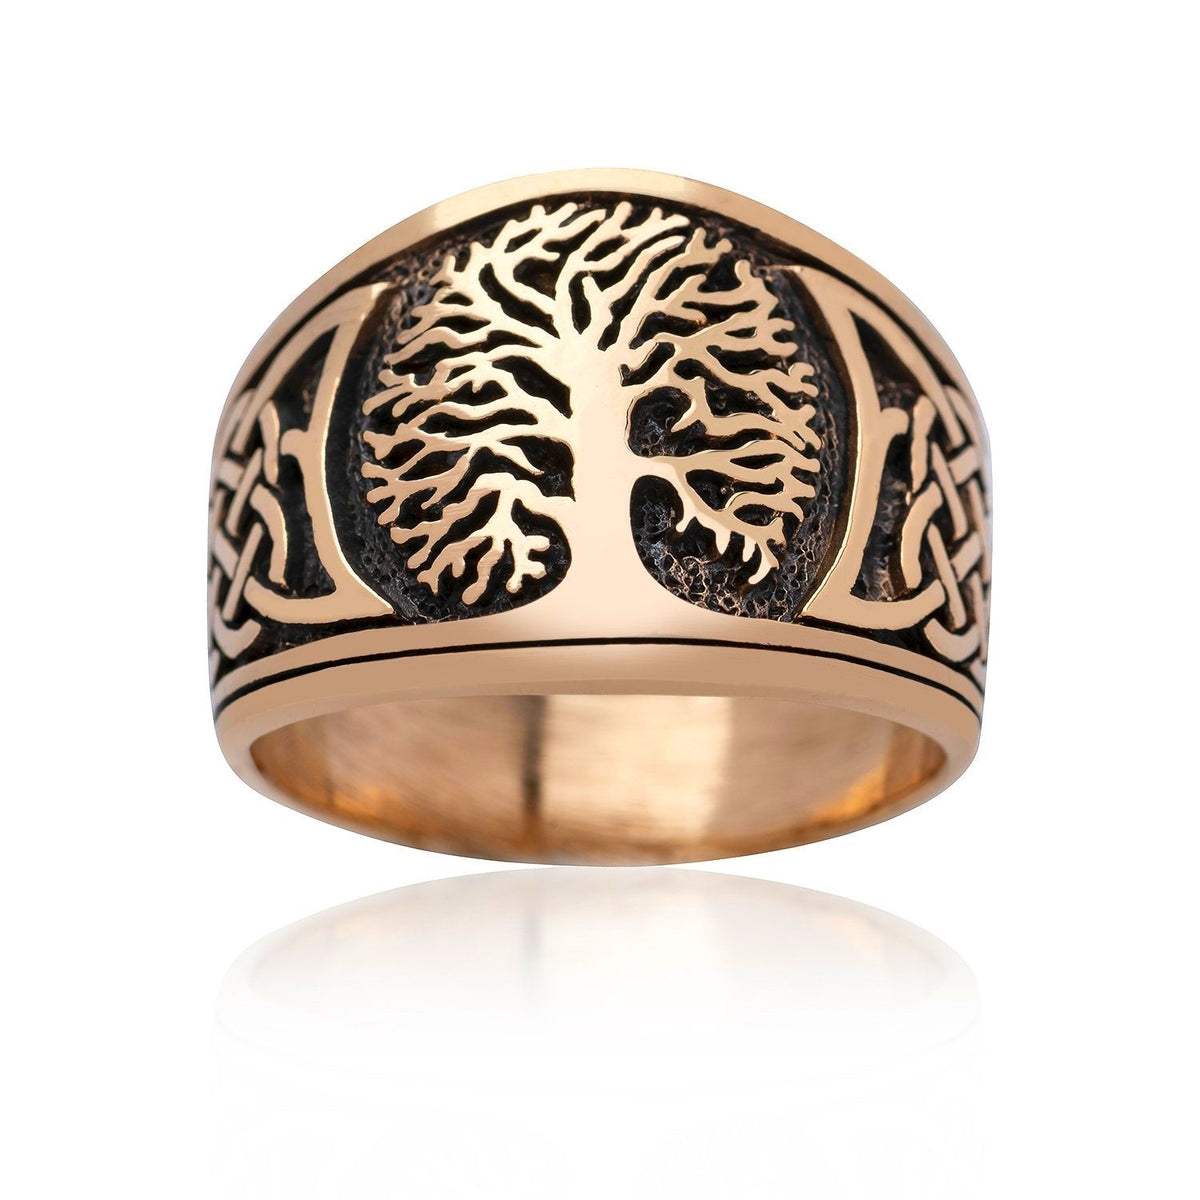 Viking Yggdrasil with Knotwork Bronze Ring - SilverMania925